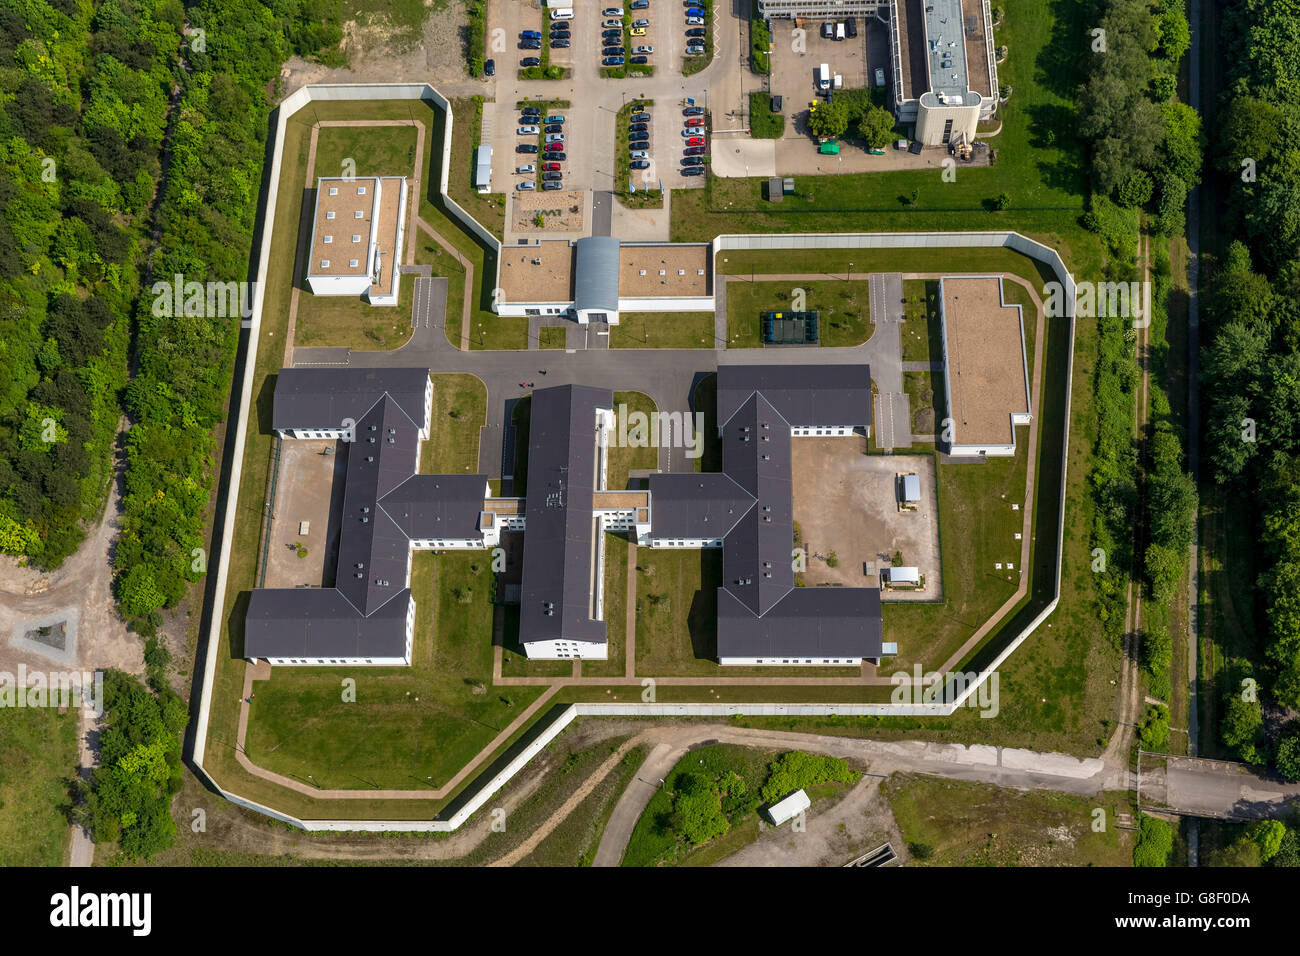 Aerial view, forensics Herne-Wanne, preventive detention, mental hospital, Herne Wanne-Eickel, Herne, Ruhr area, Stock Photo